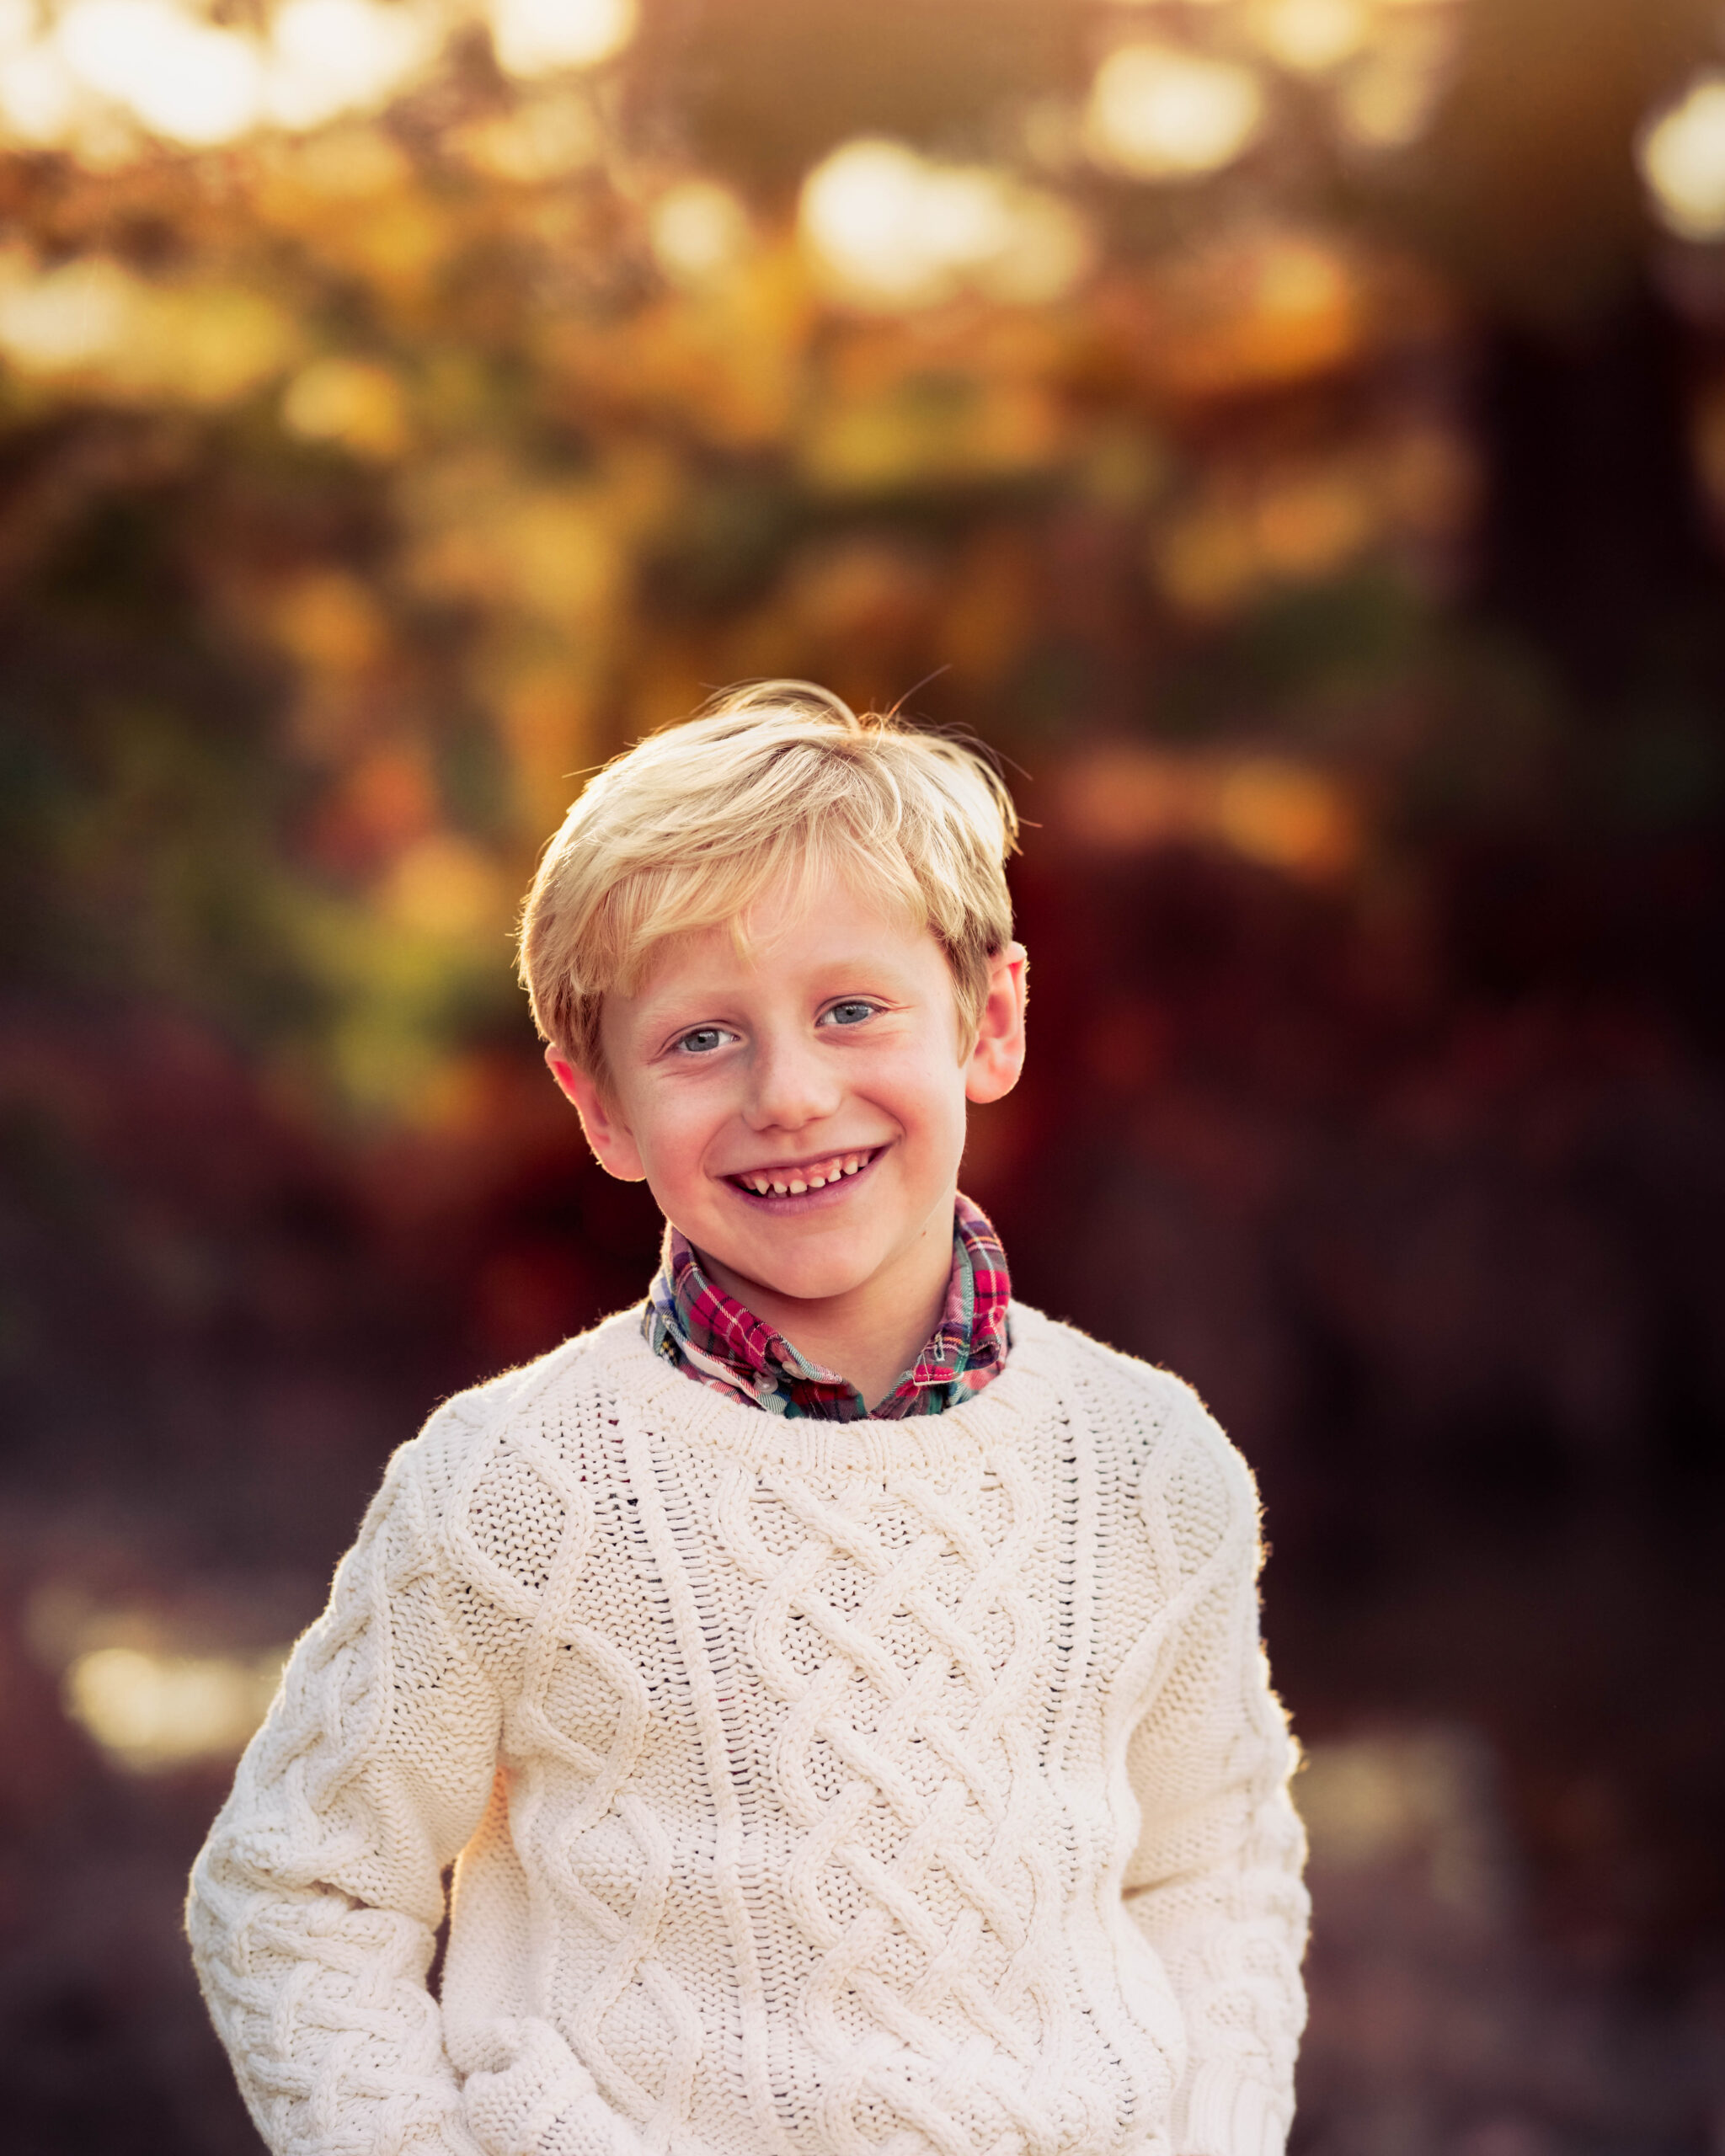 A young boy in a white knit sweater stands in a park at sunset